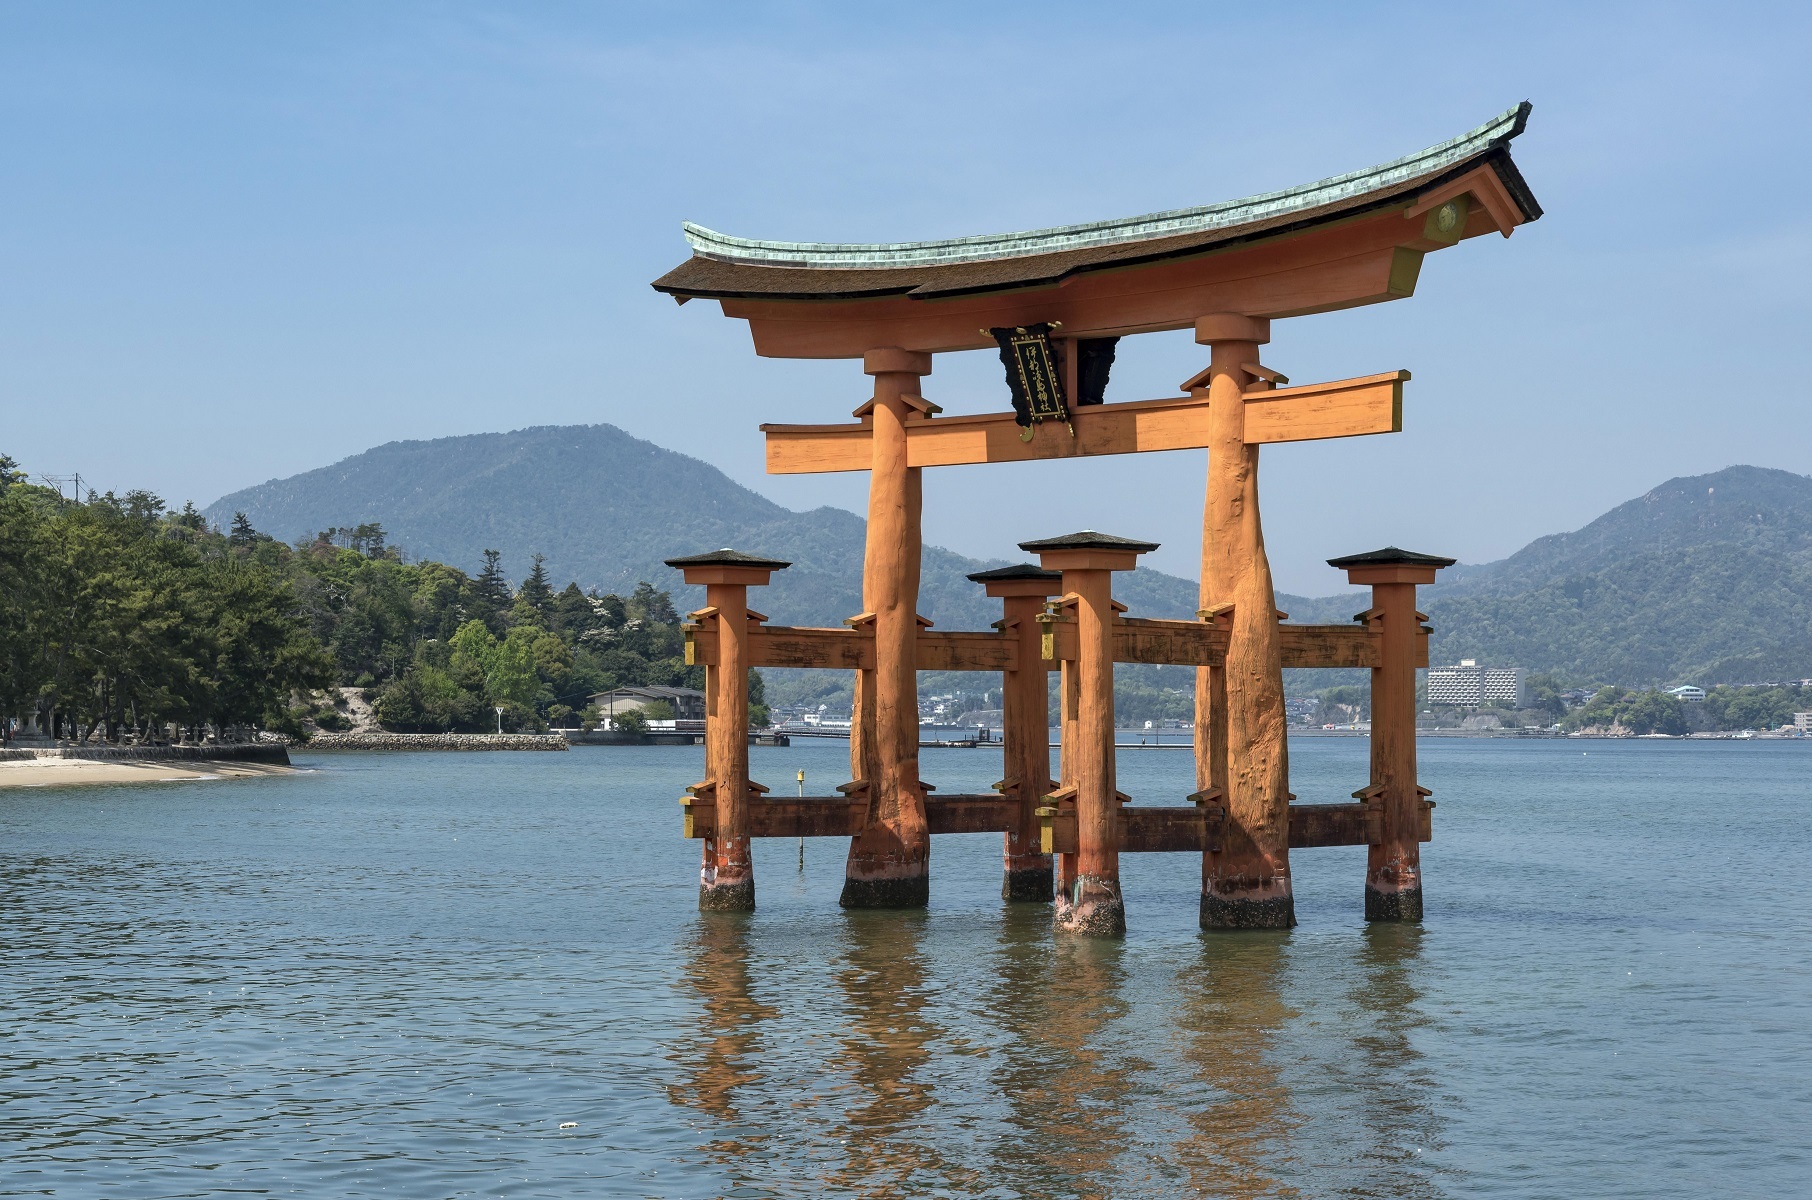 <p>Unique for being built over water, the shrine and <a href="https://www.japan-guide.com/e/e3450.html">torii gate on Miyajima</a> (which literally translates to “shrine island”) give the impression of floating in the sea at high tide.</p><p>The shrine, which dates back centuries, is an important site in the Shinto tradition and features a prayer hall, a main hall and a theatre, which are connected by boardwalks and held up by pillars in the sea. </p><p>After sunset, the shrine is illuminated every day until 11 p.m. and is a spectacular site for visitors. </p>